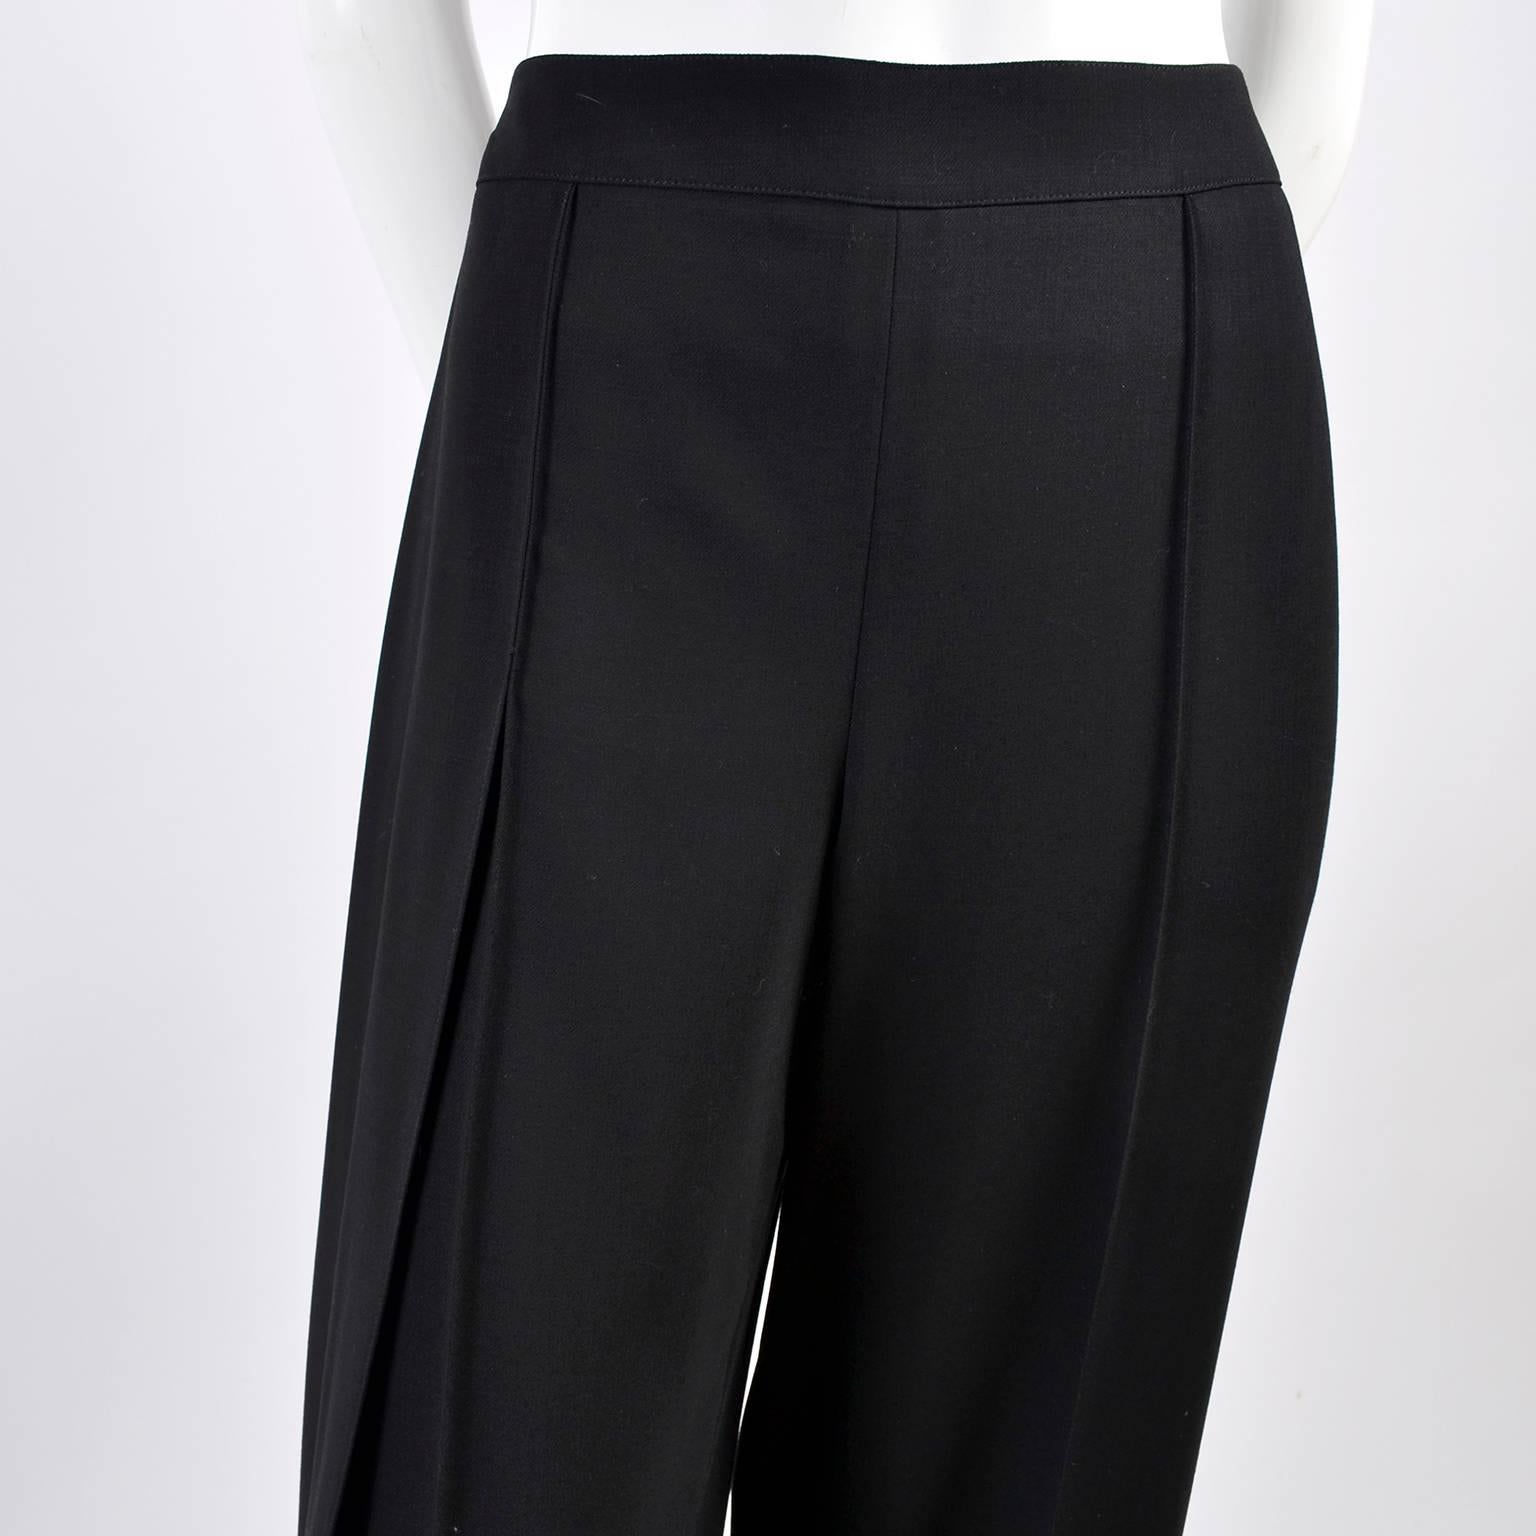 New 1990s Black Wool Chanel Pants W High Waist & Side Fly Away Panel 40 US 10 In New Condition For Sale In Portland, OR